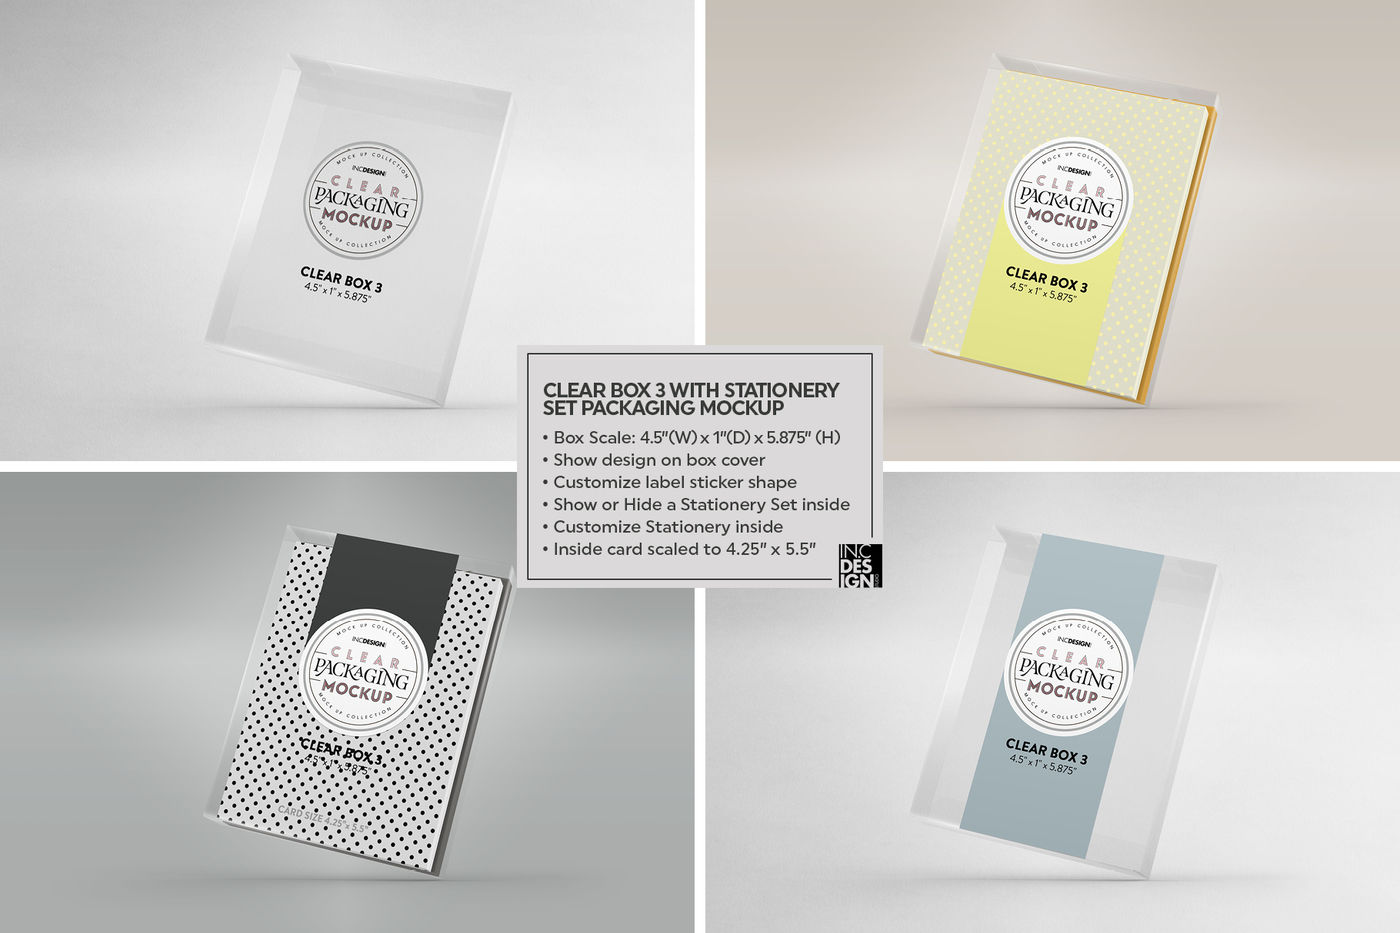 Download Clear Box Set With Stationery Packaging Mockup By Inc Design Studio Thehungryjpeg Com